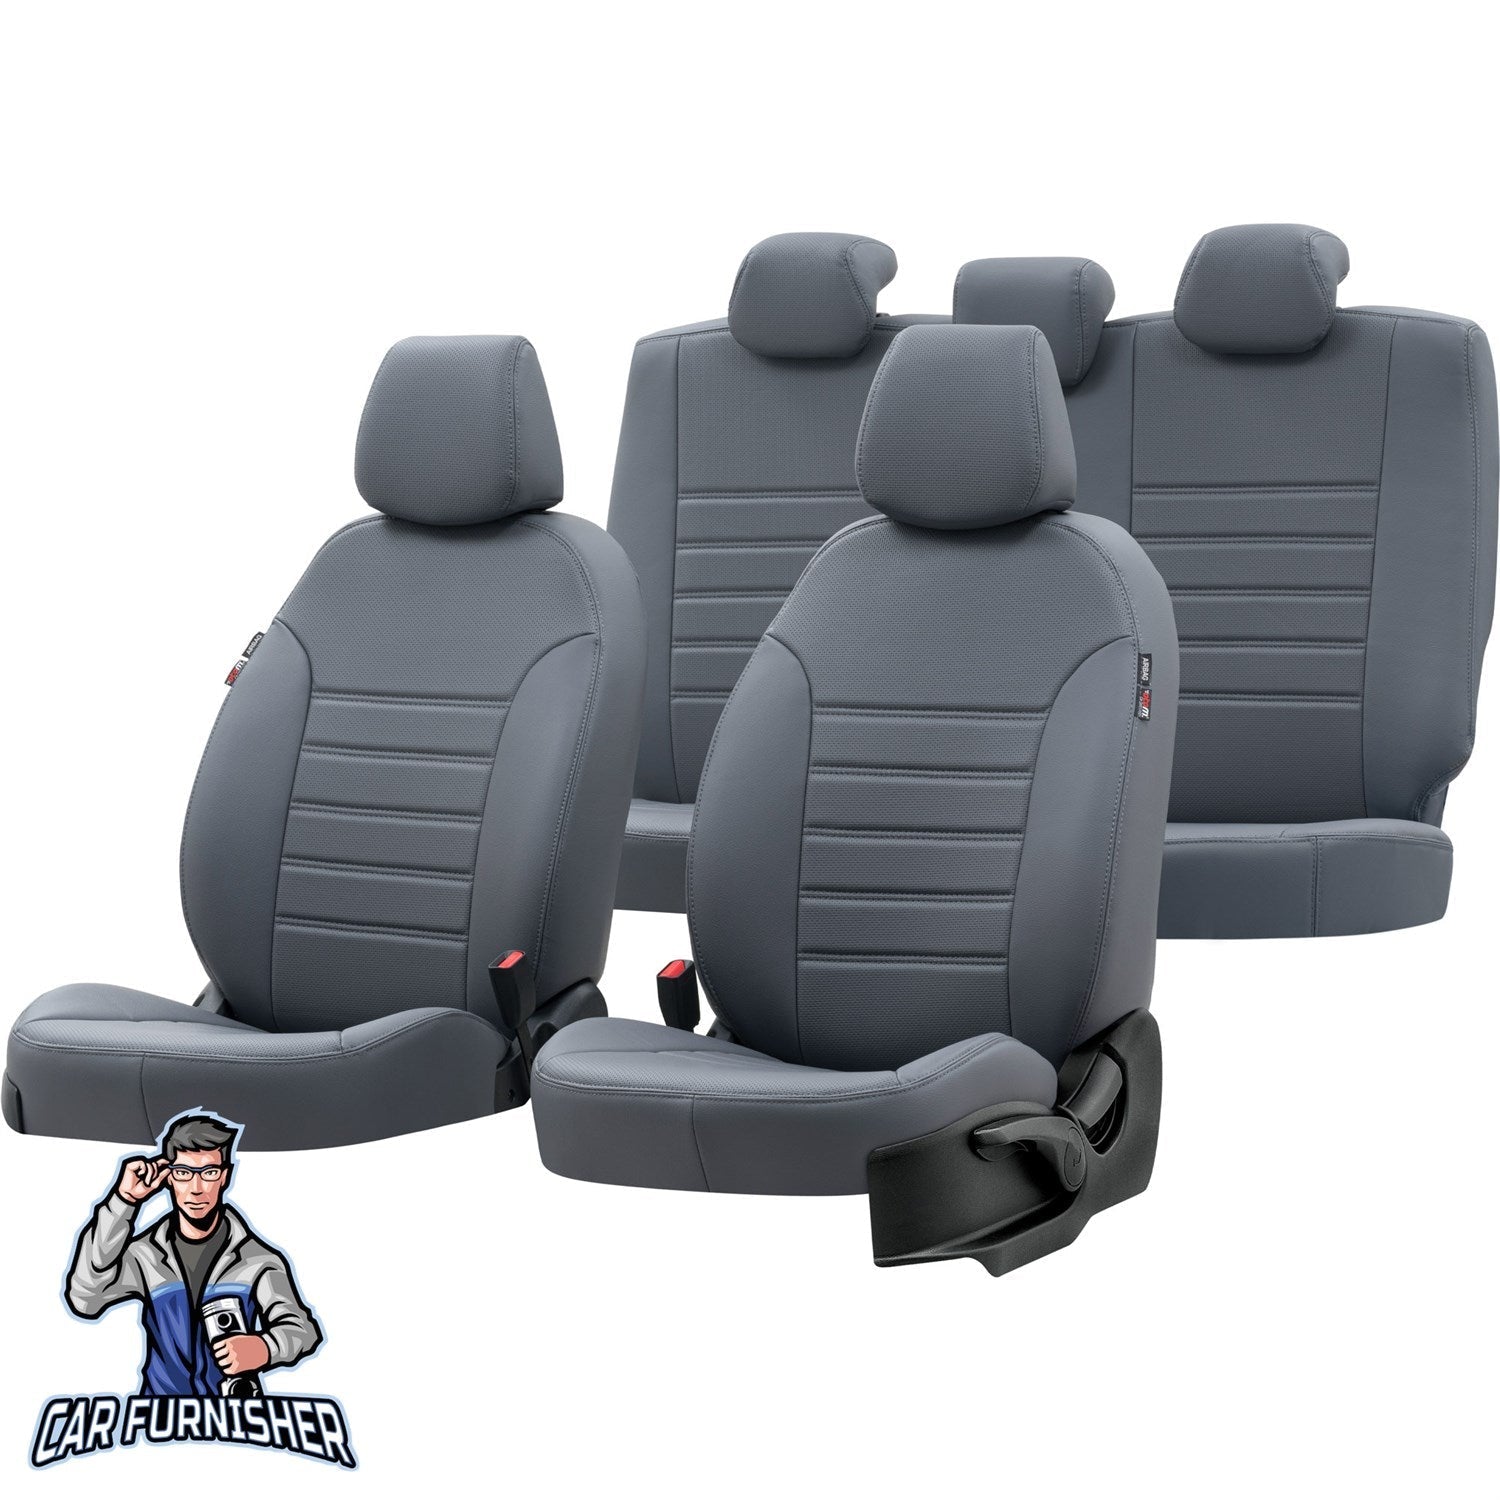 Renault Modus Seat Covers New York Leather Design Smoked Leather